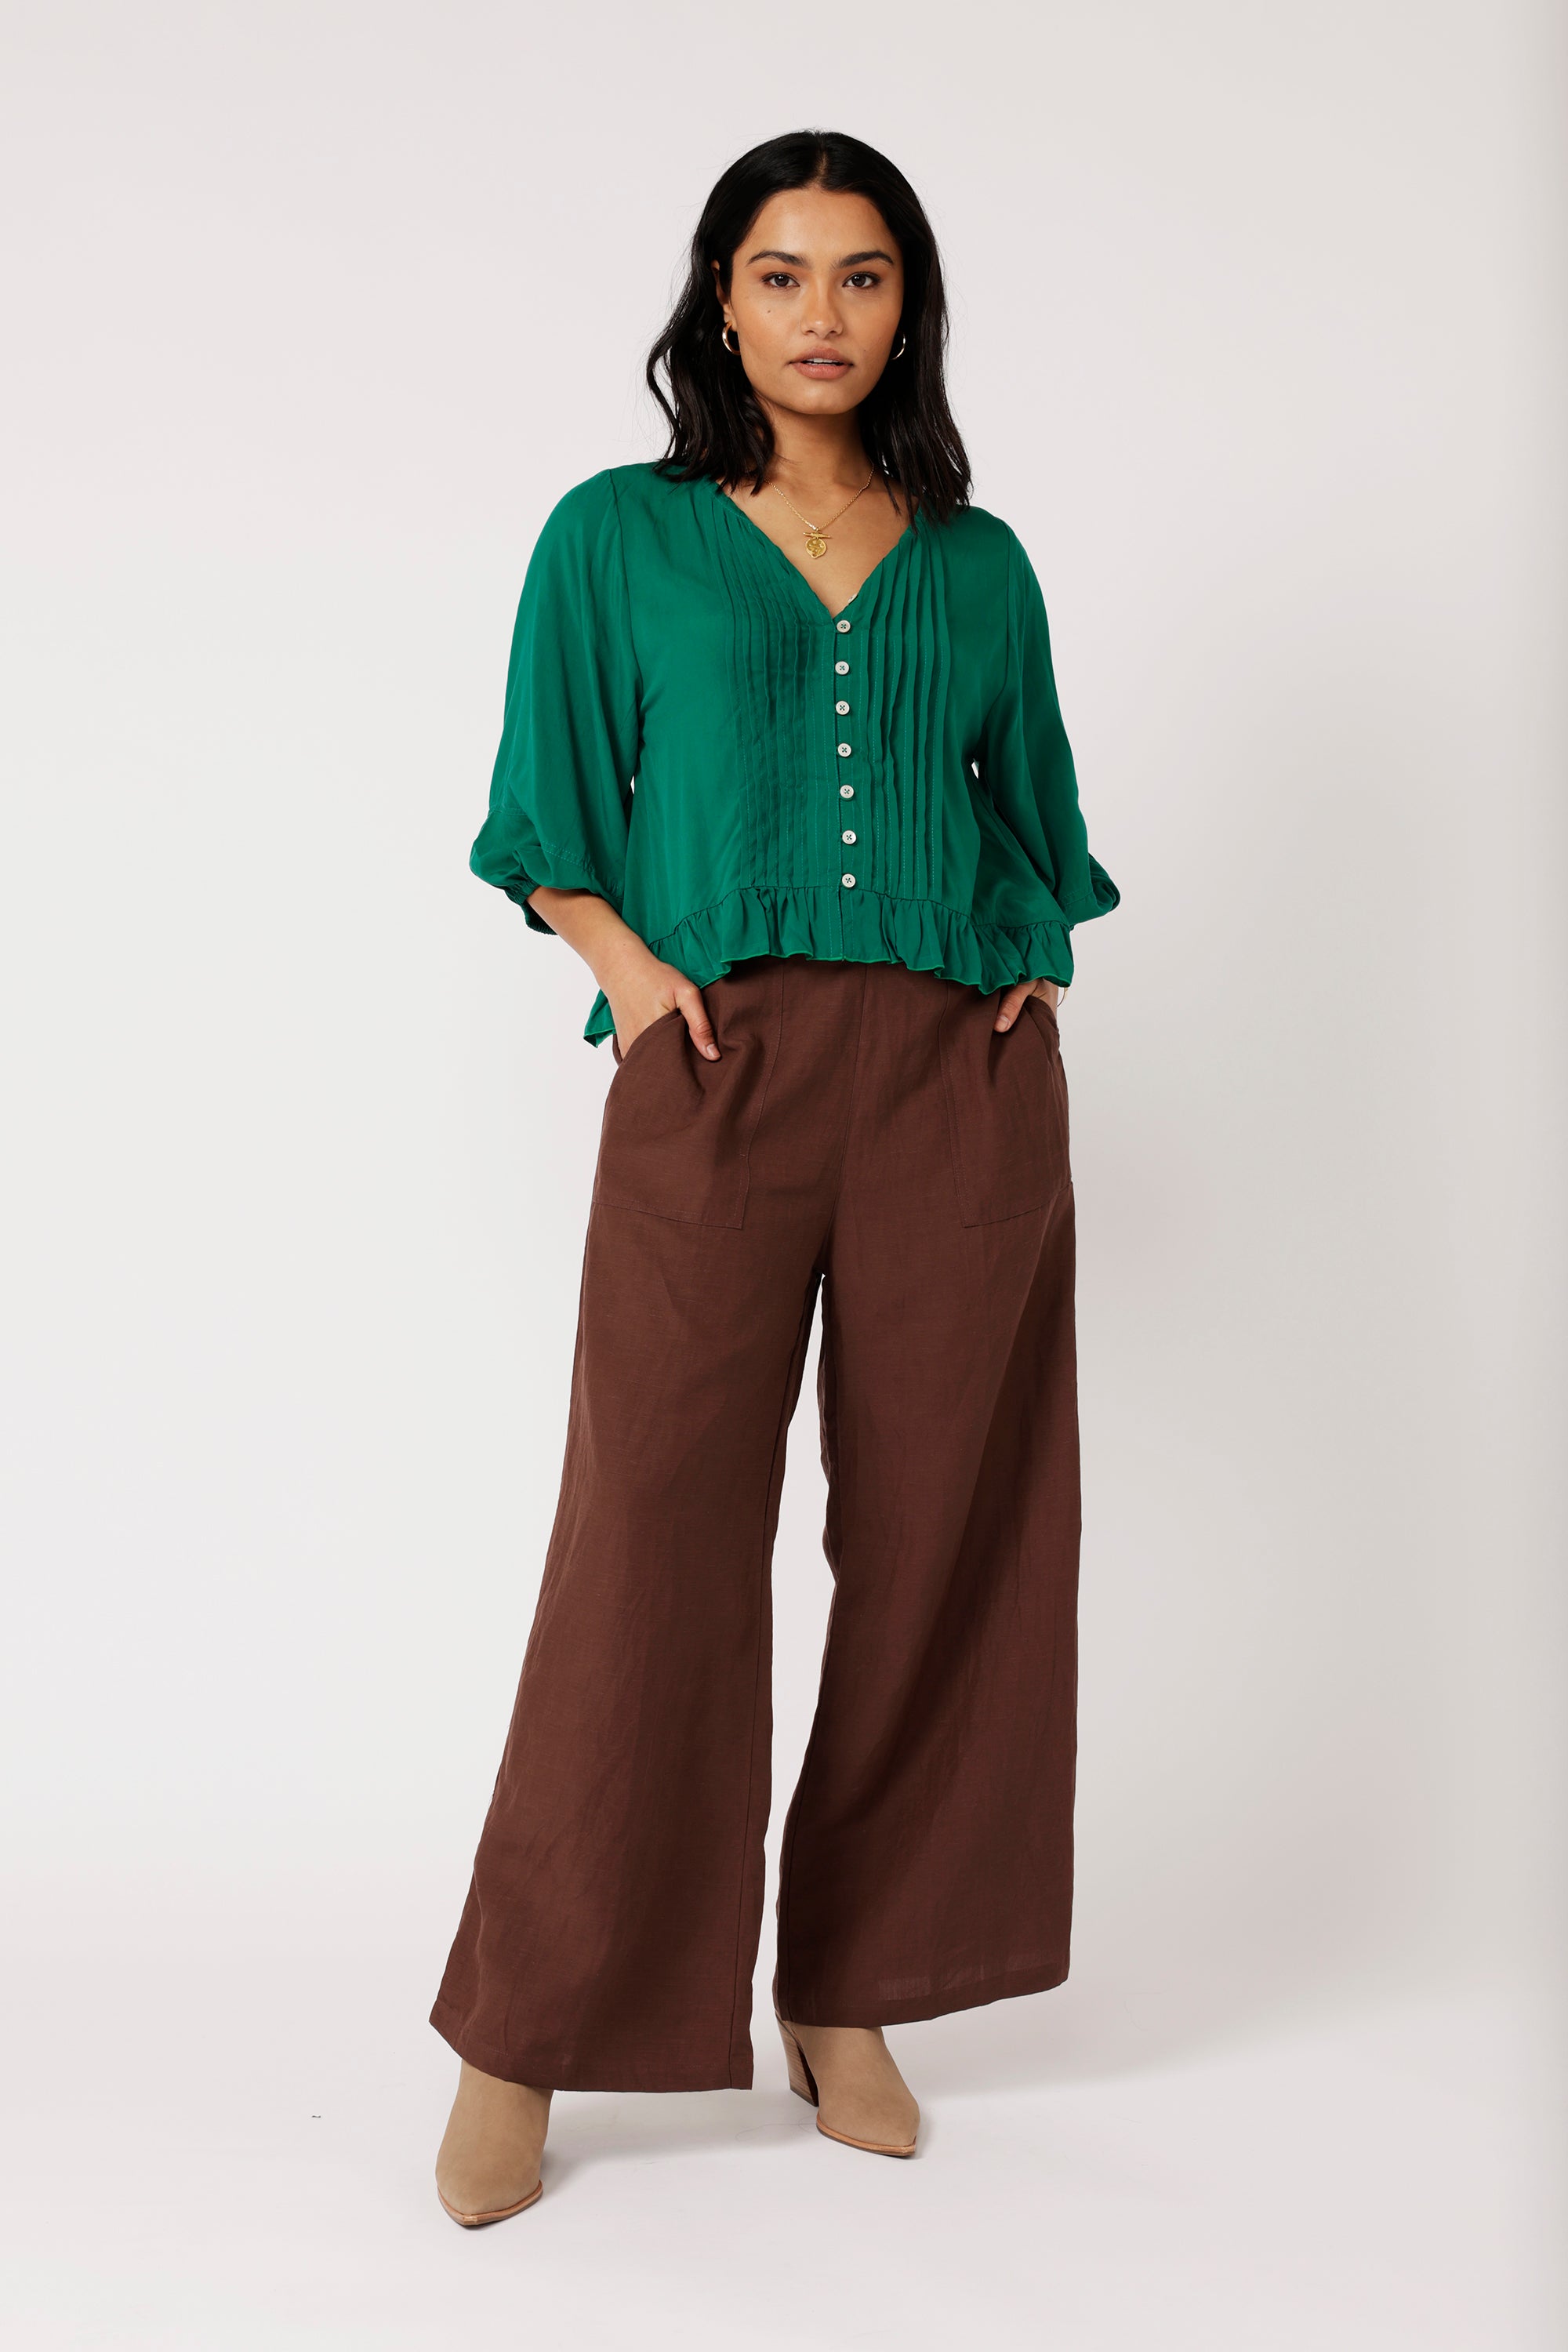 Lily Rose Top (Long Sleeve)| Forest Green - Saffron Road